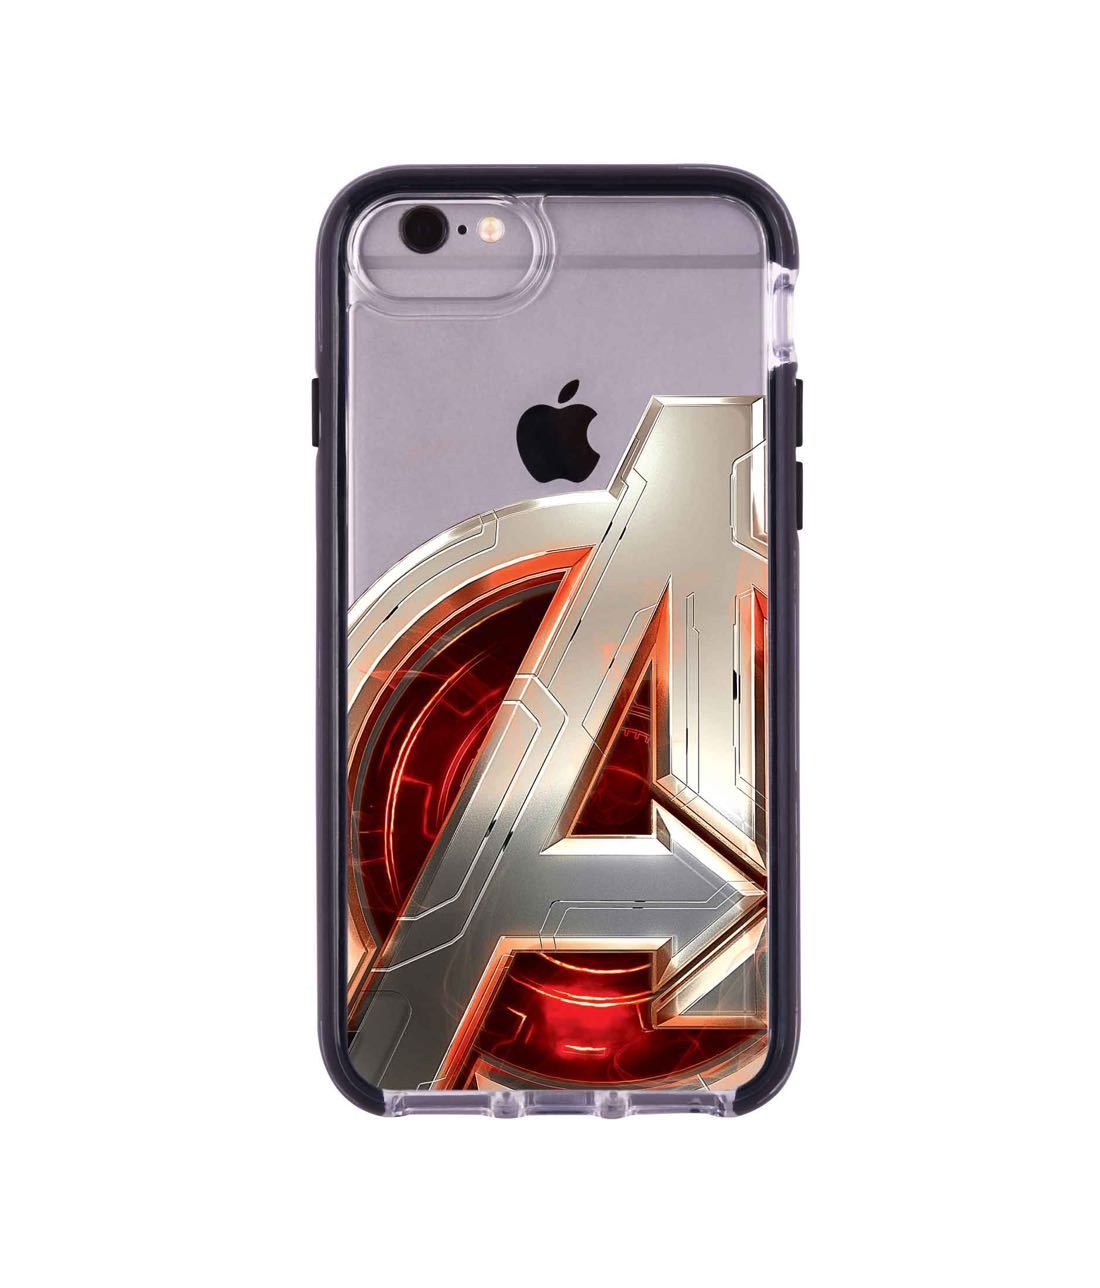 Avengers Version 2 - Extreme Phone Case for iPhone 6S